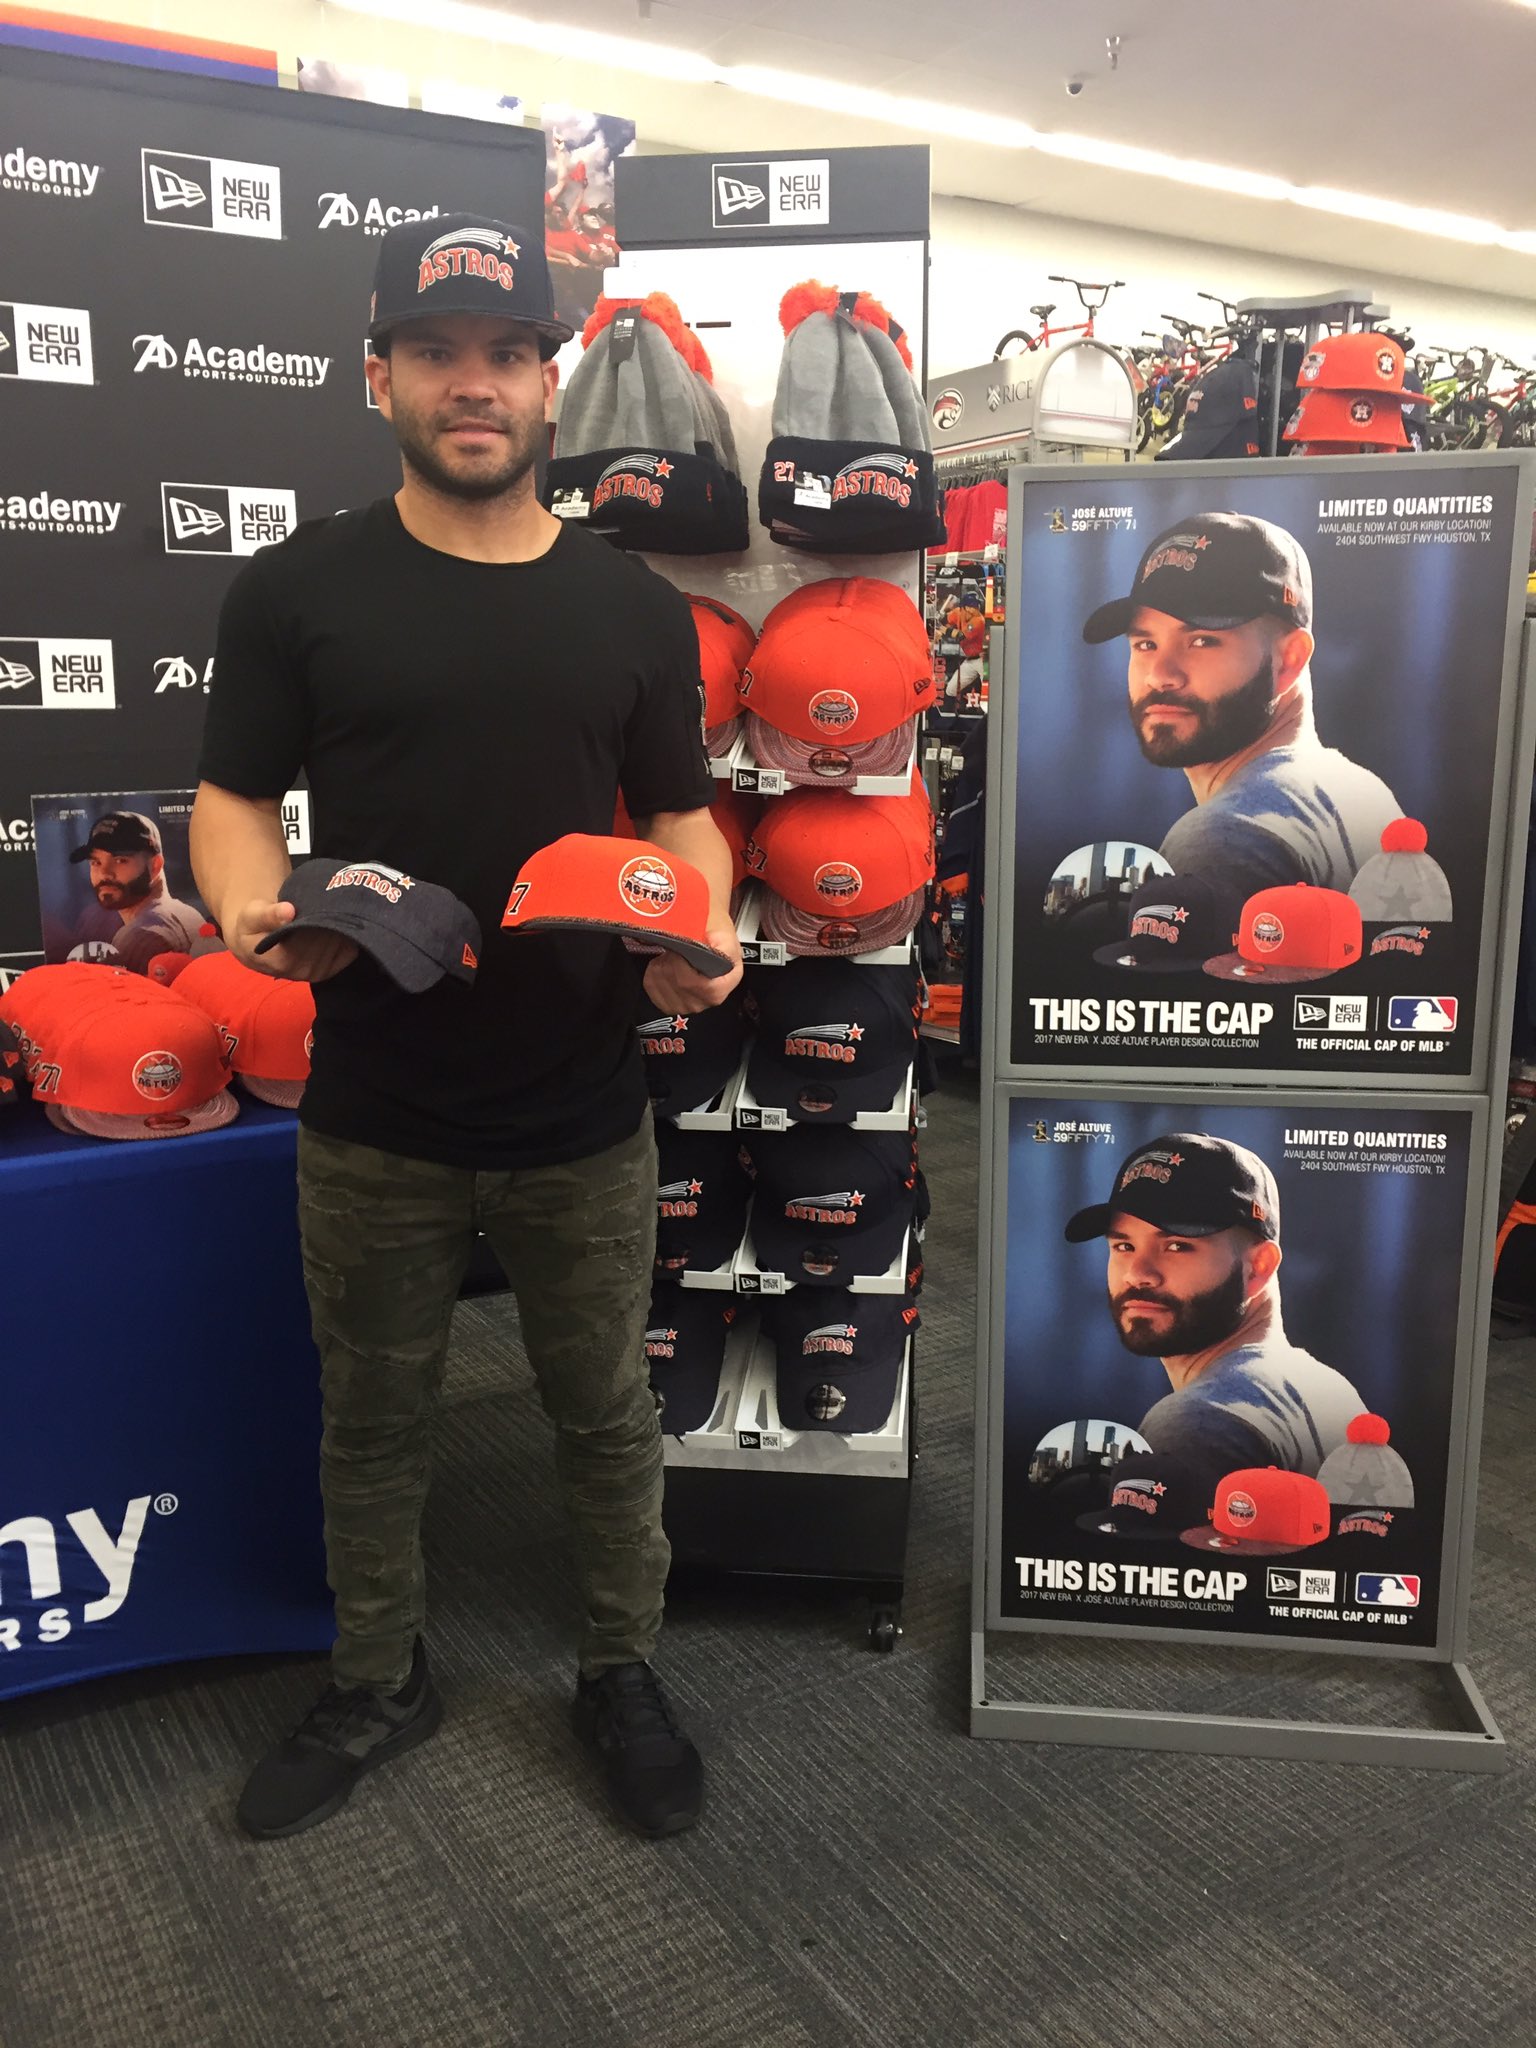 Jose Altuve on X: Stop by @Academy Kirby location or   to check out the @astros caps I designed with  @NewEraCap  / X